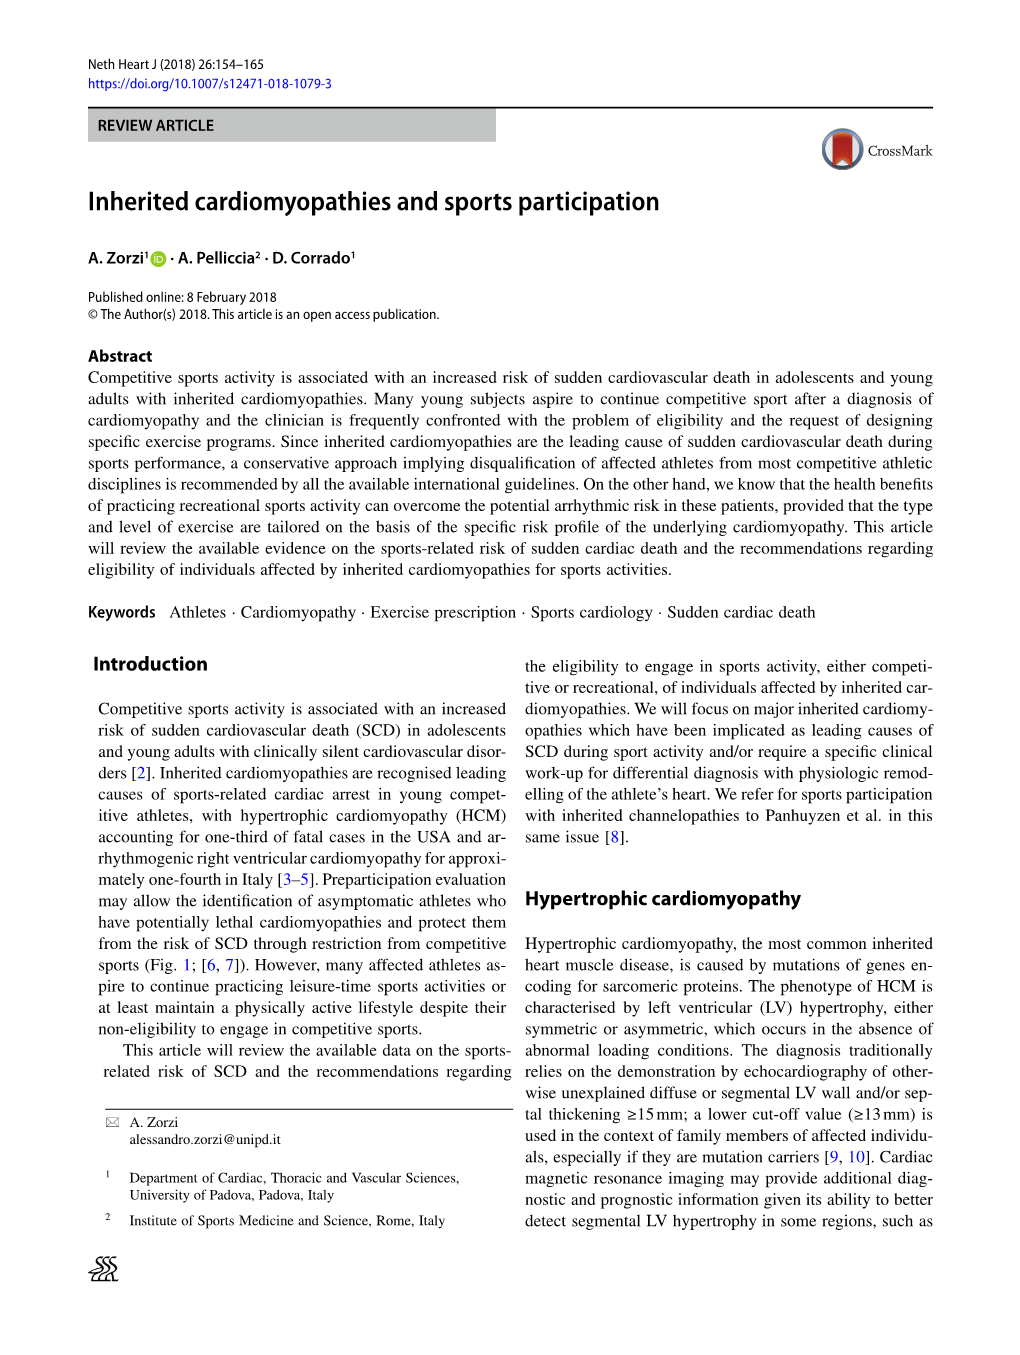 Inherited Cardiomyopathies and Sports Participation